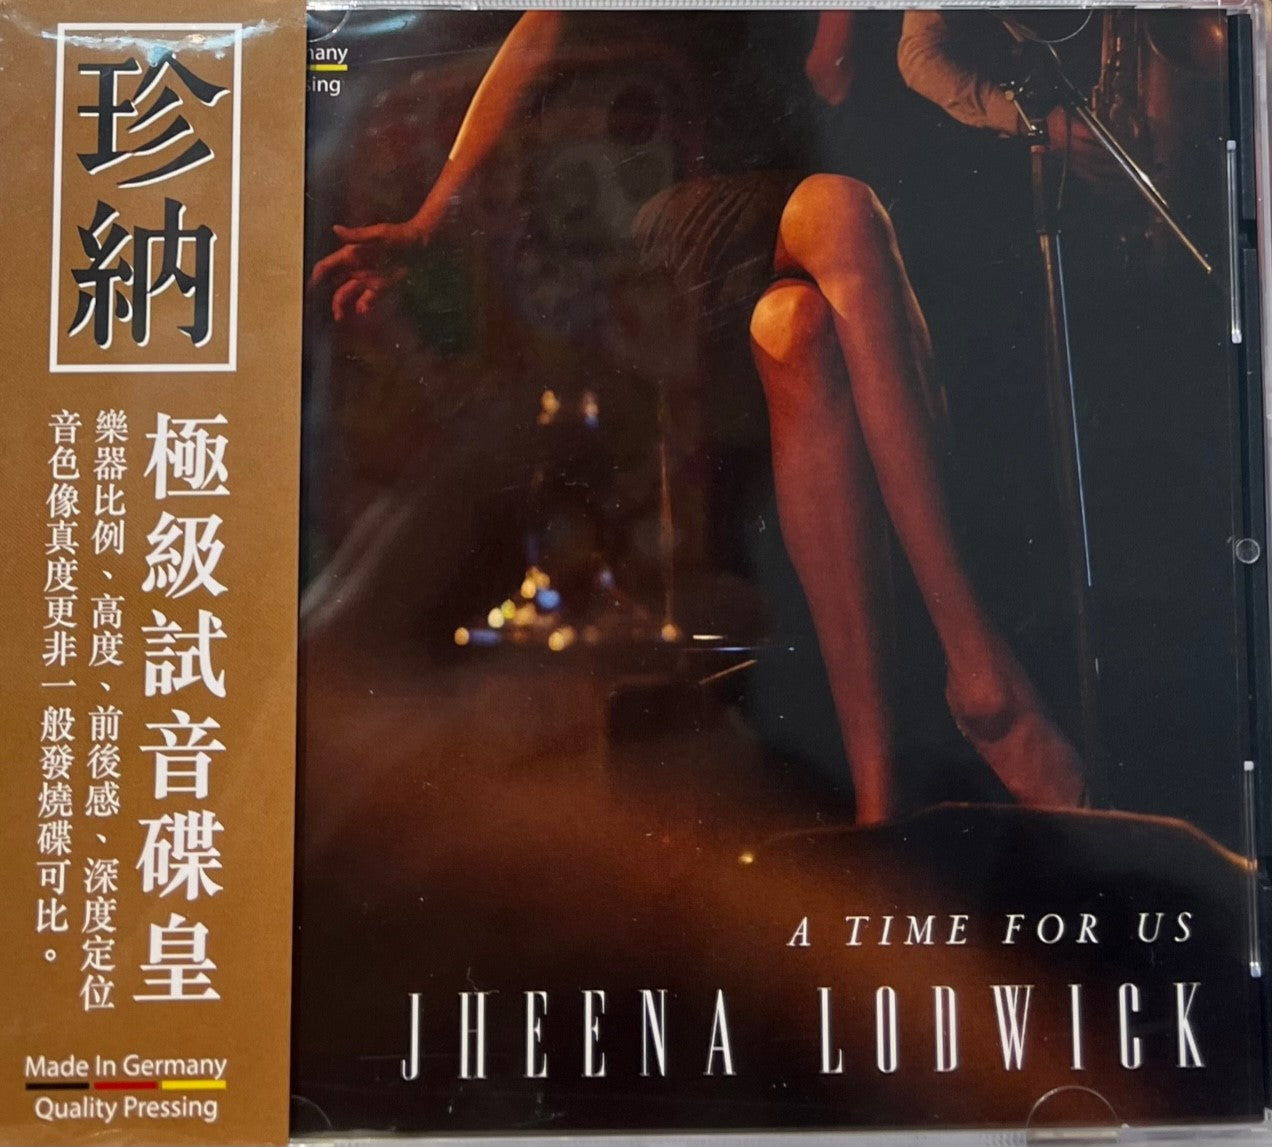 JHEENA LODWICK - A TIME FOR US 2022 (CD) MADE IN GERMANY